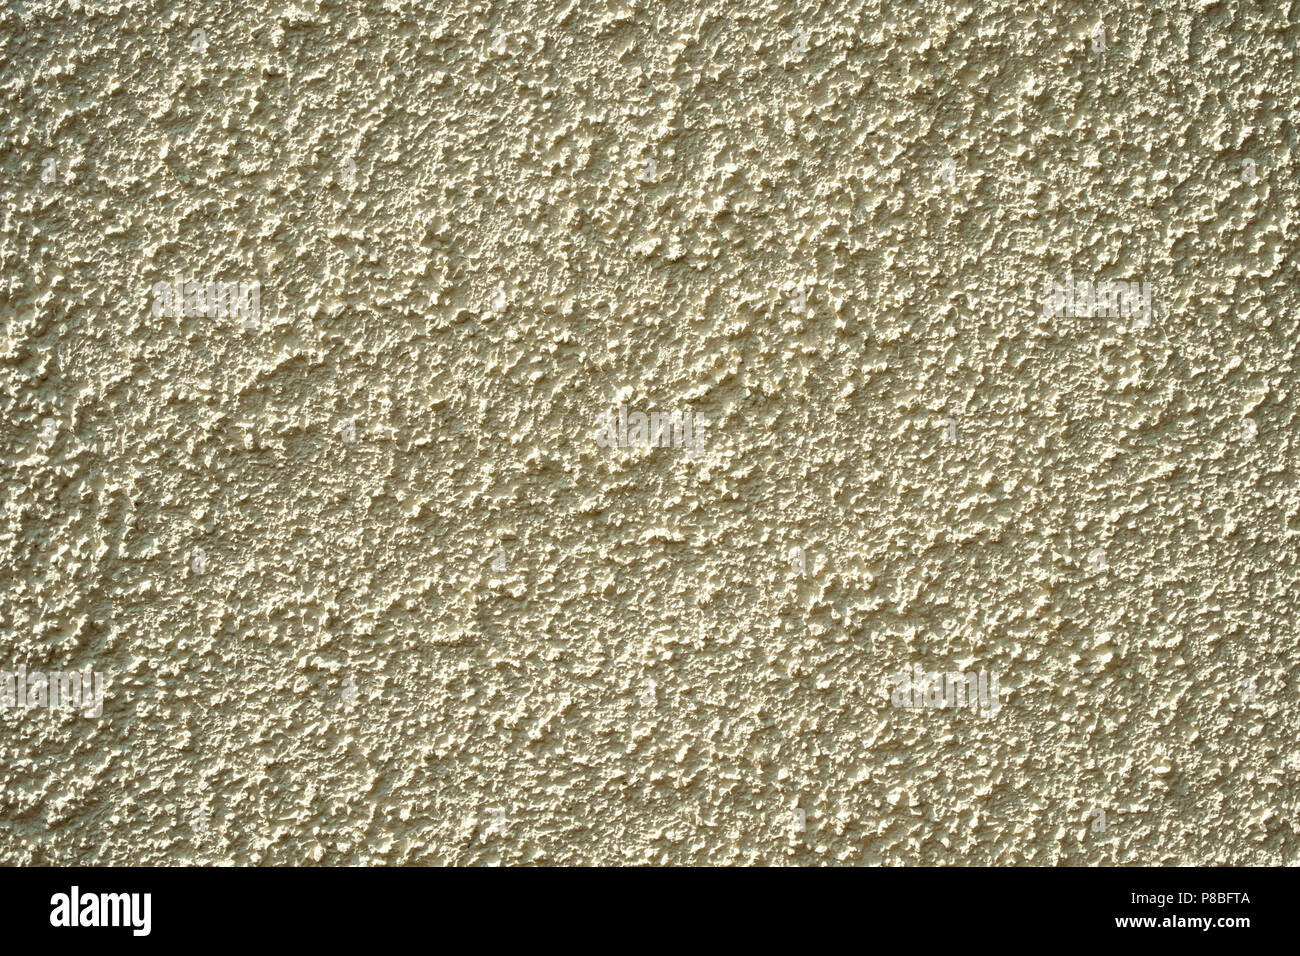 Painted rough cast wall render texture full frame background Stock Photo